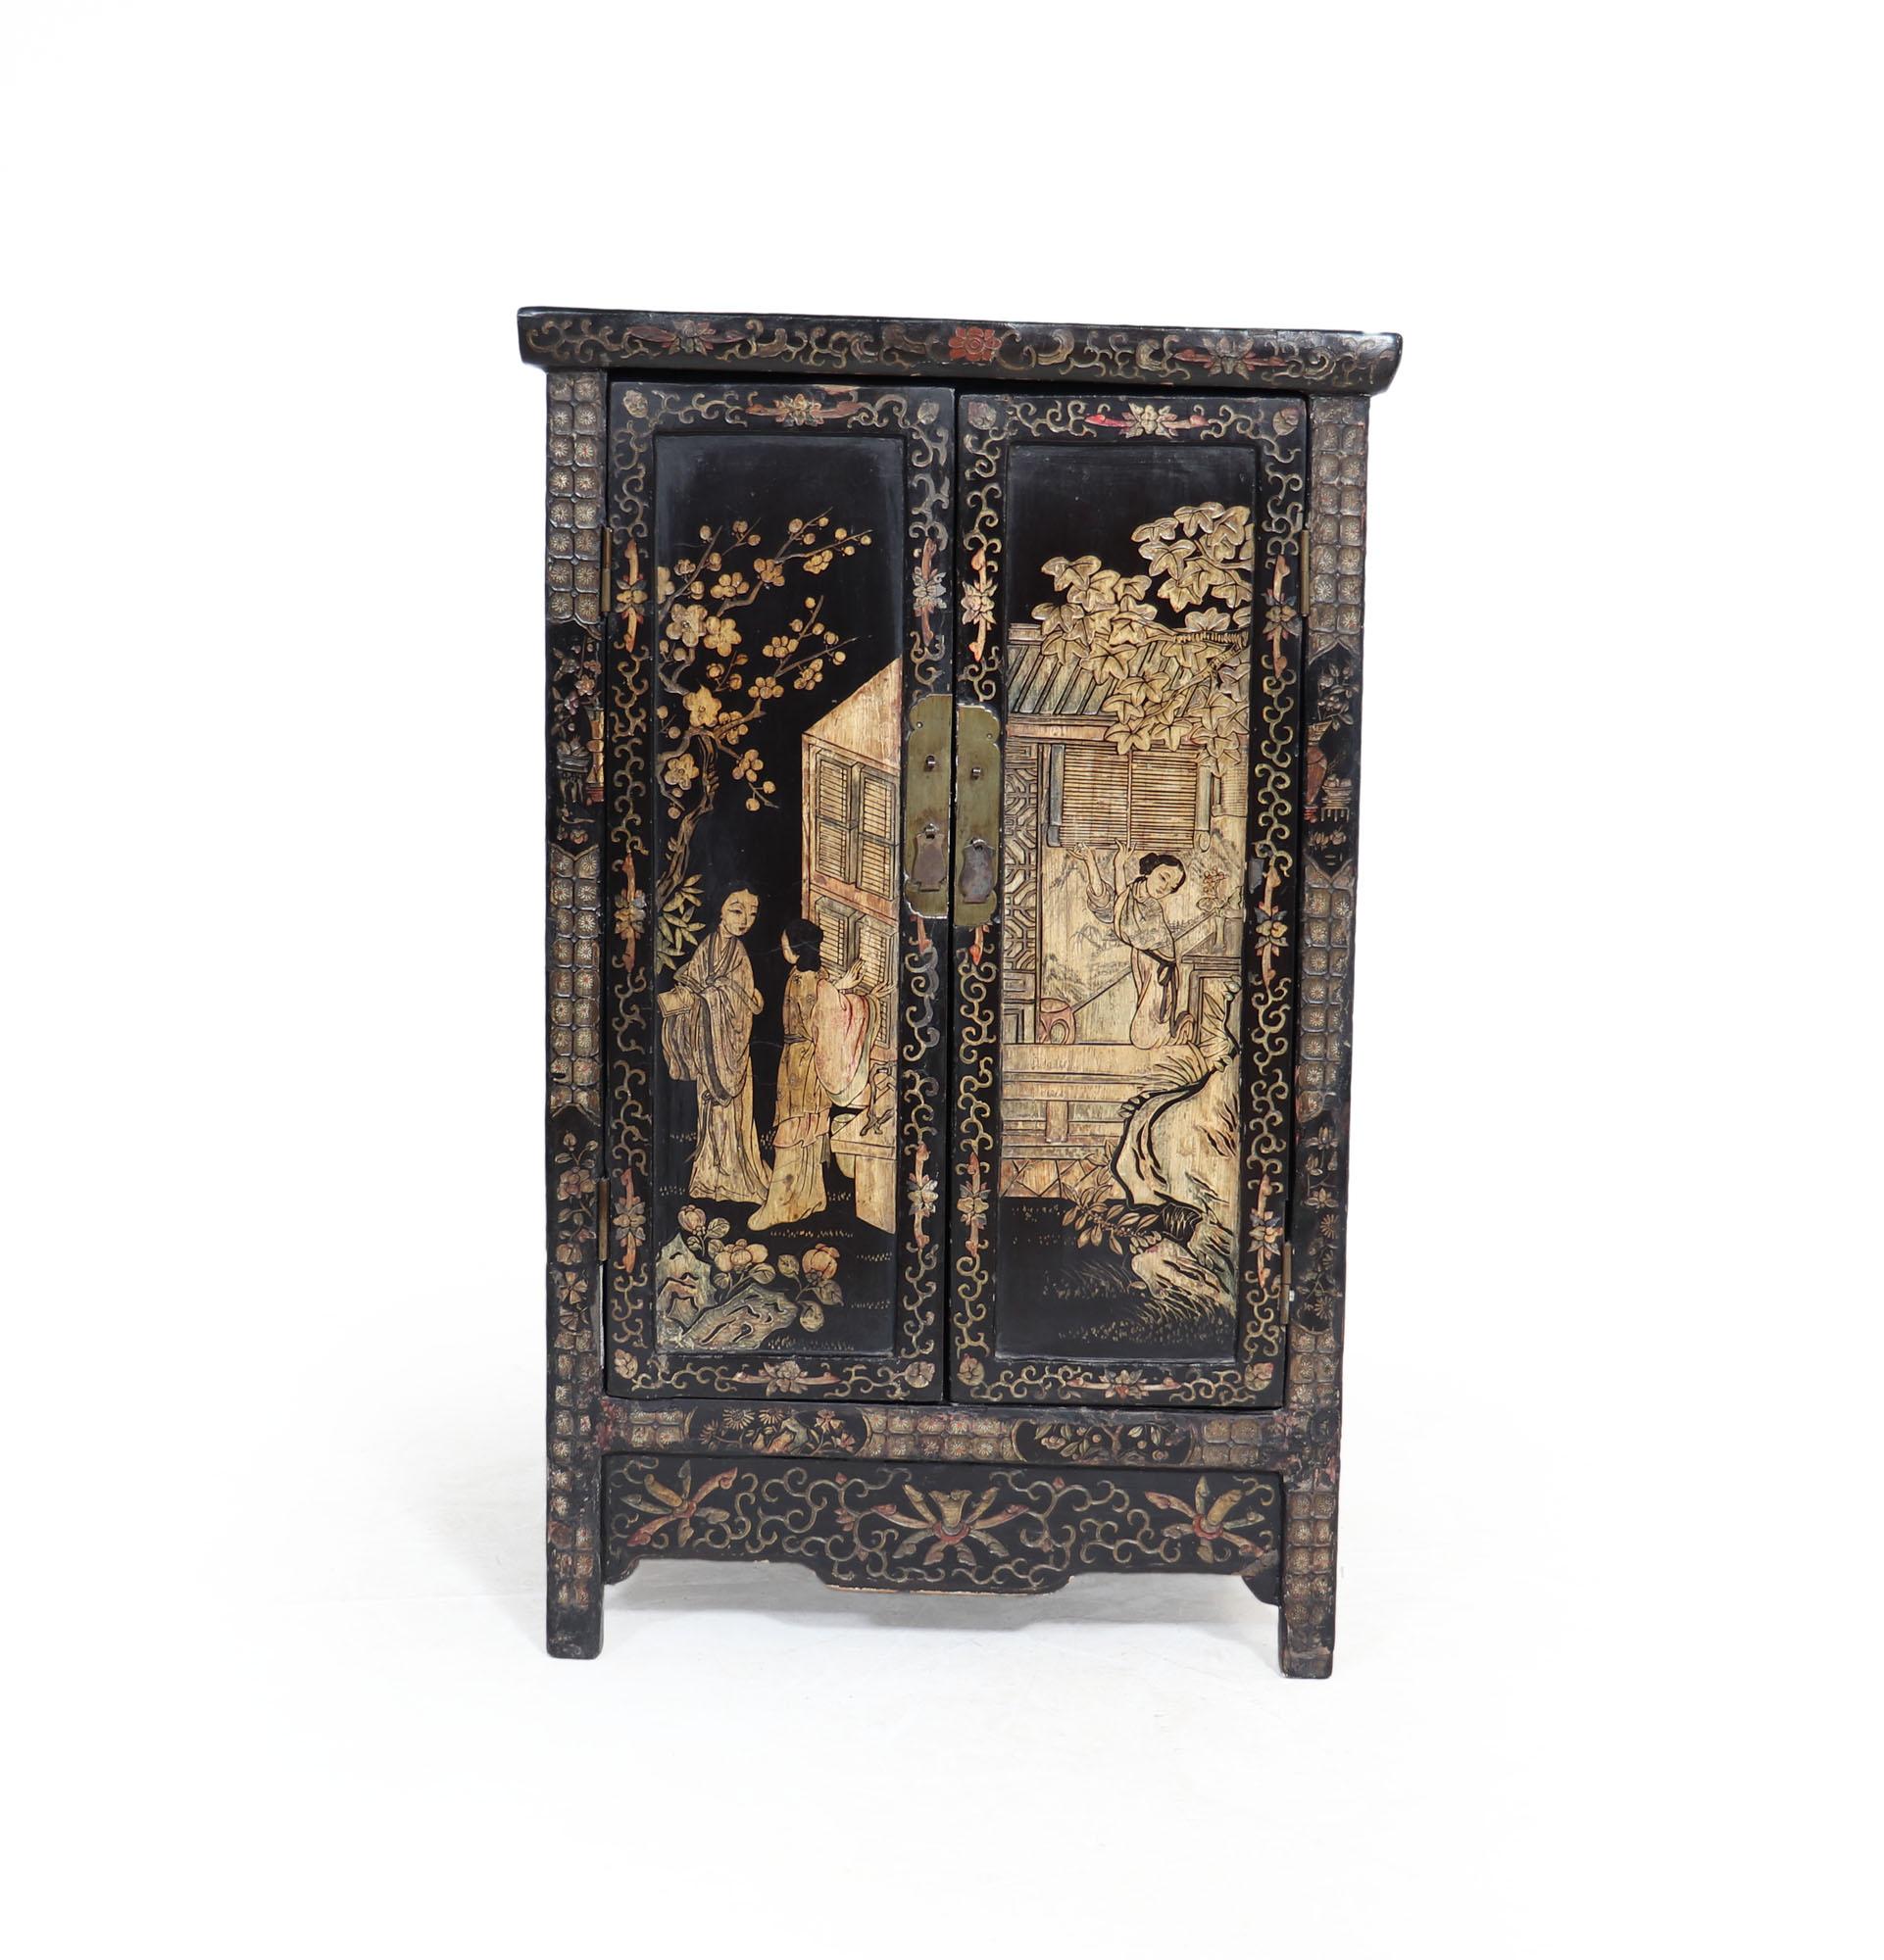 A stunning Chinese Chinoiserie Cabinet from c1860 is an architectural masterpiece. Expertly crafted, the two-door cabinet features intricate metal handles and delicate stone inlay that make it a unique treasure. The cabinet, which is crafted from